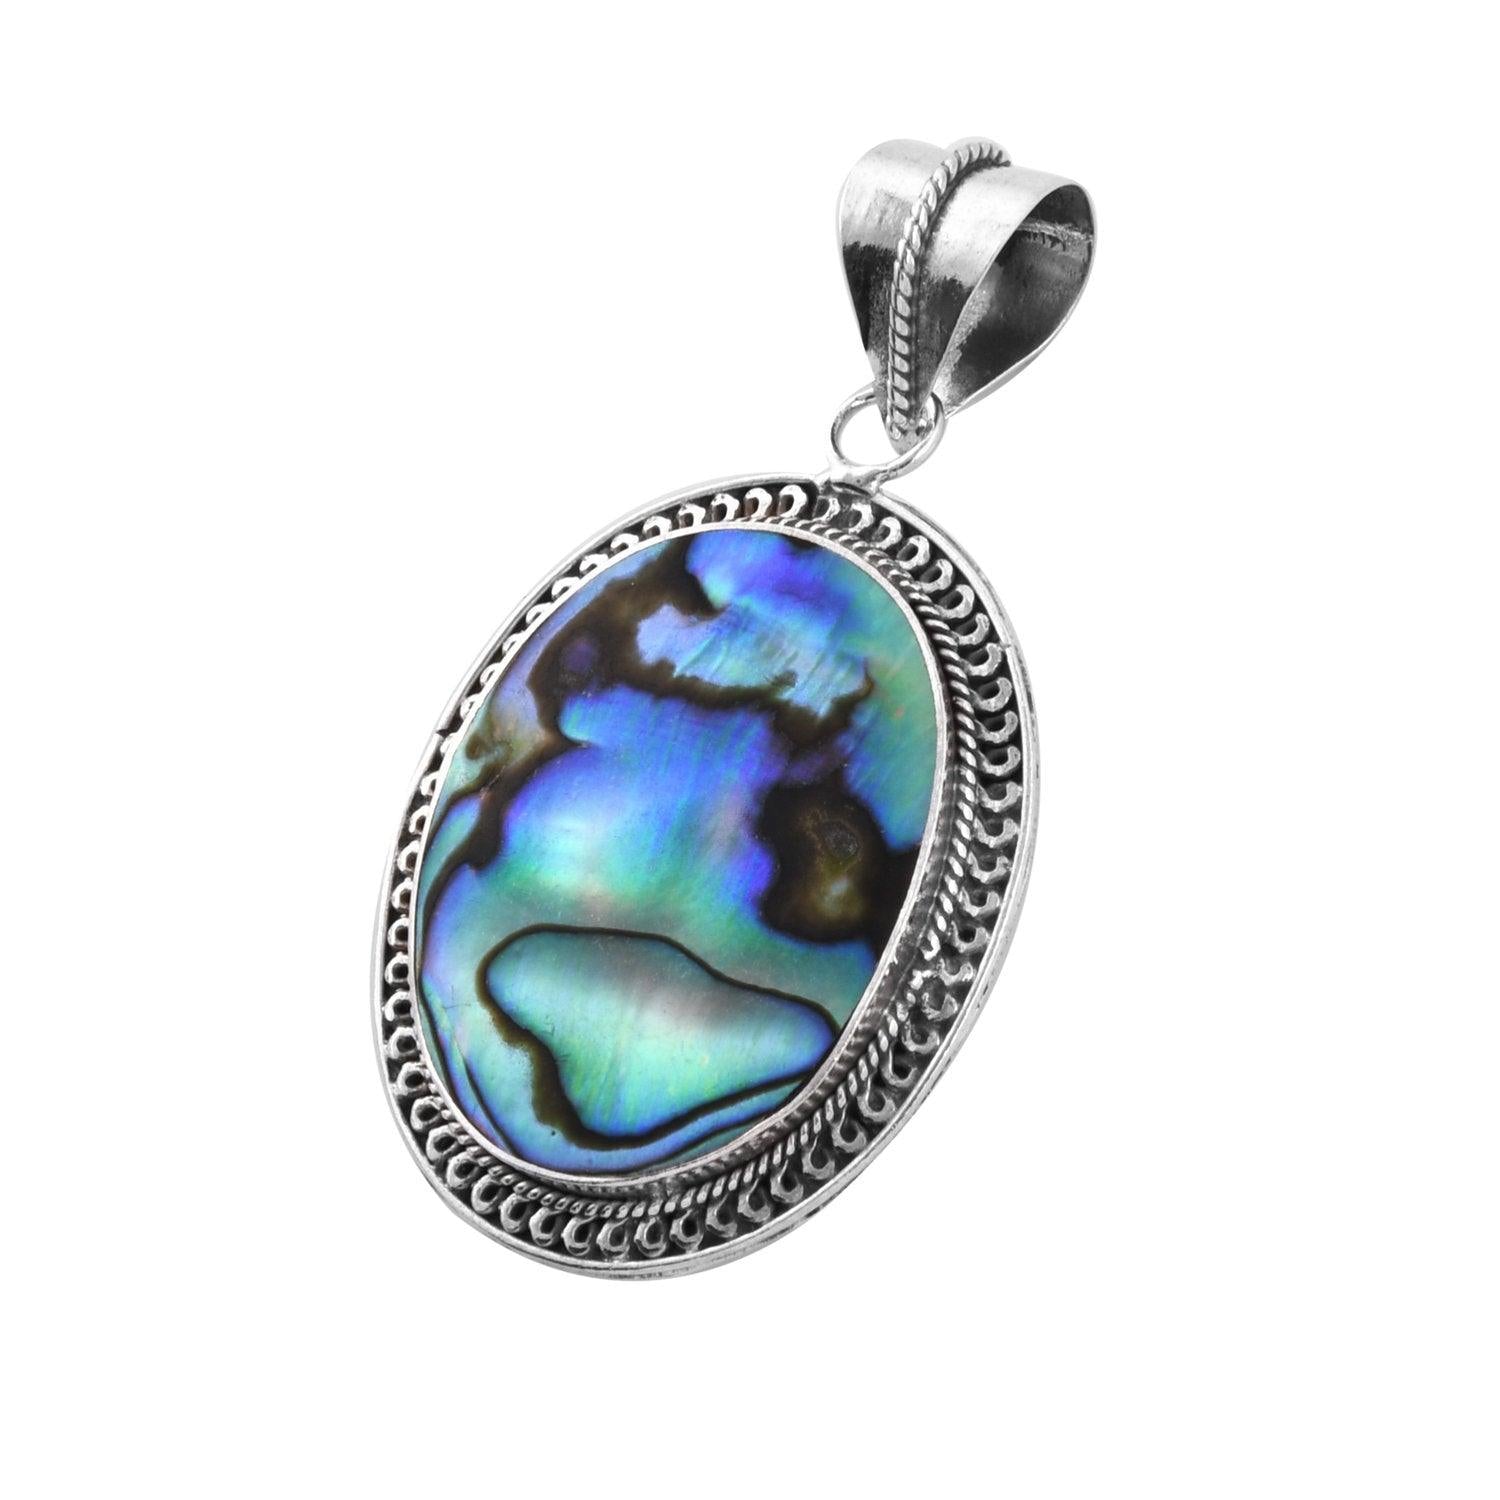 ABALONE PAUA Shell Oval Pendant in 925 Sterling Silver - Inspiring Jewellery